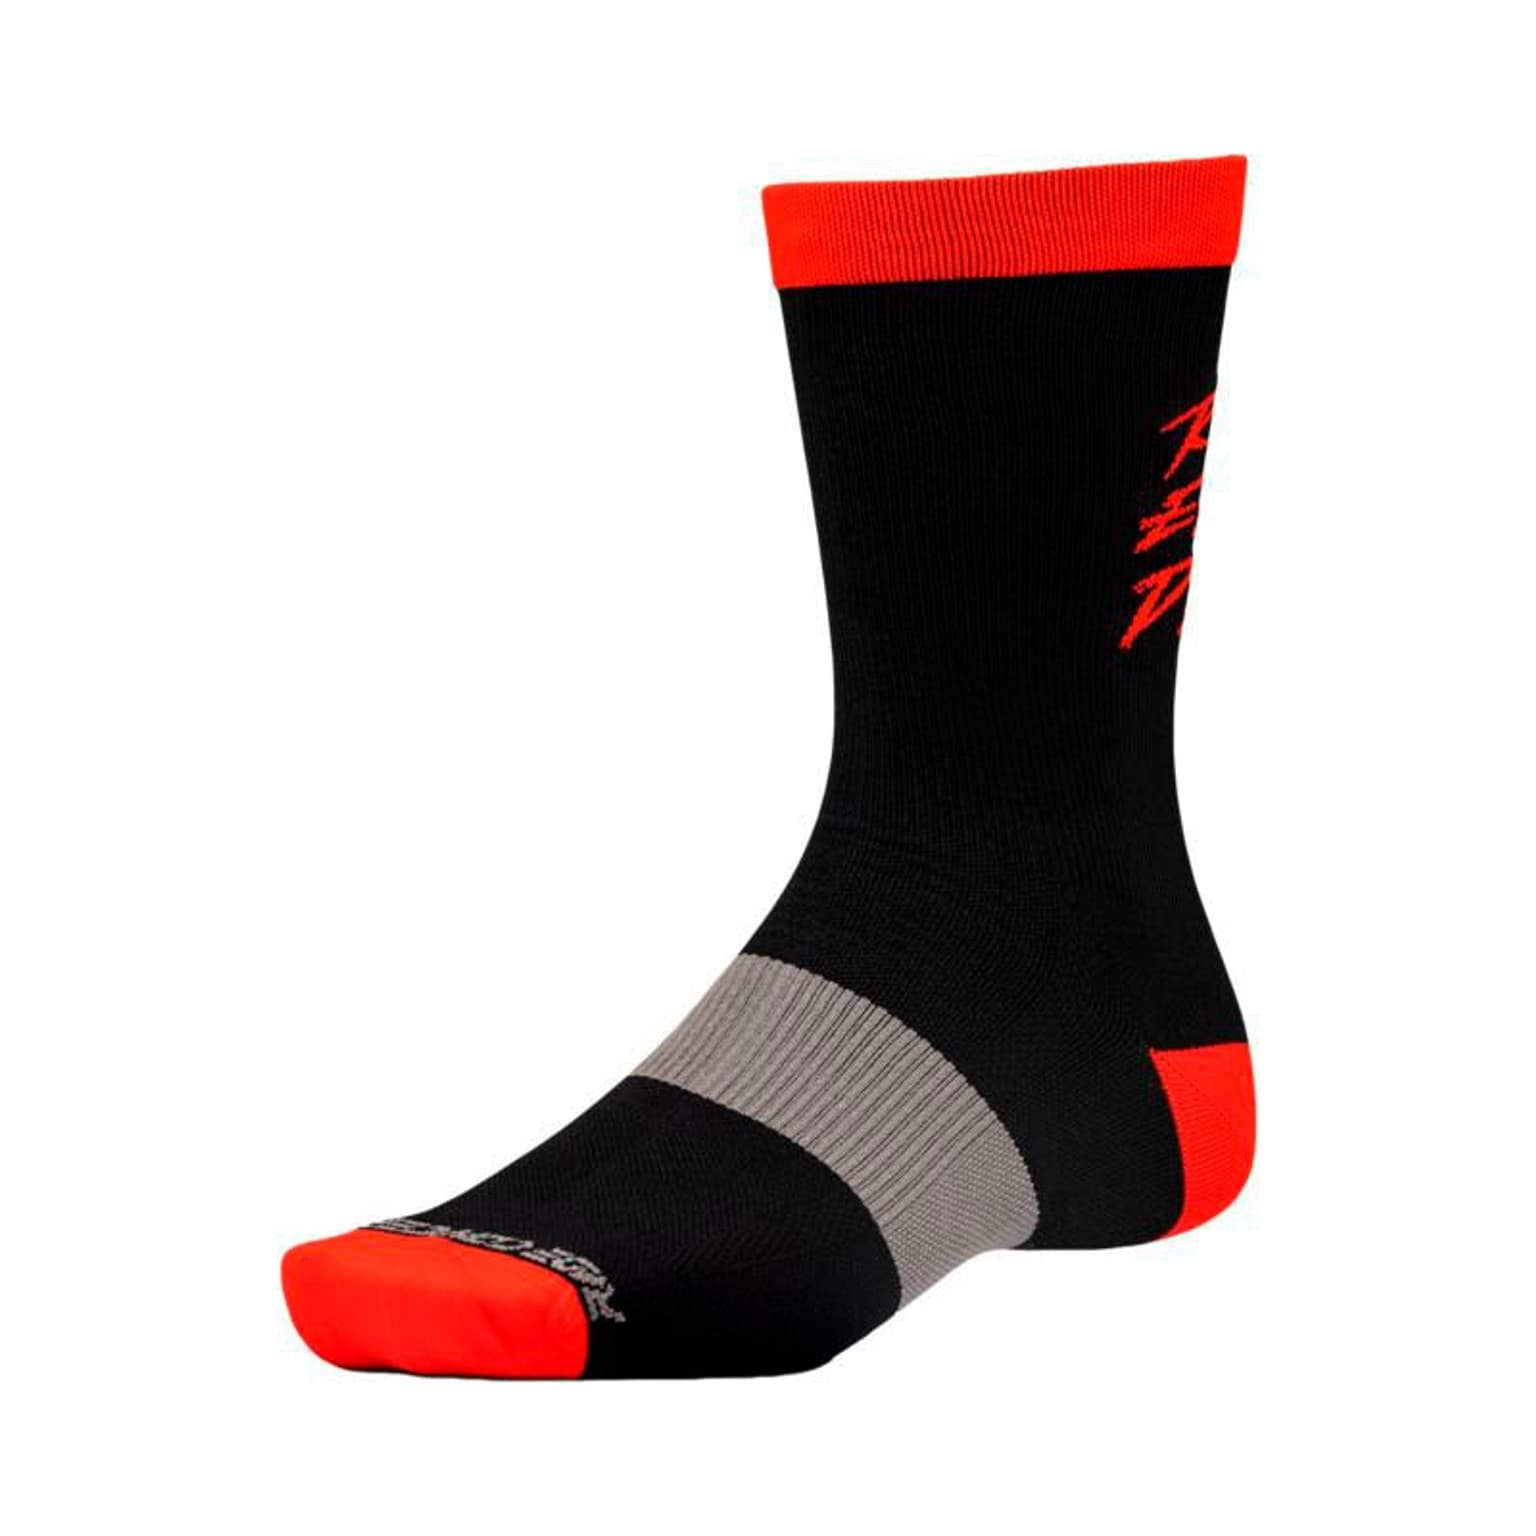 Ride Concepts Ride Concepts Ride Every Day Synthetic Chaussettes de vélo rouge 2